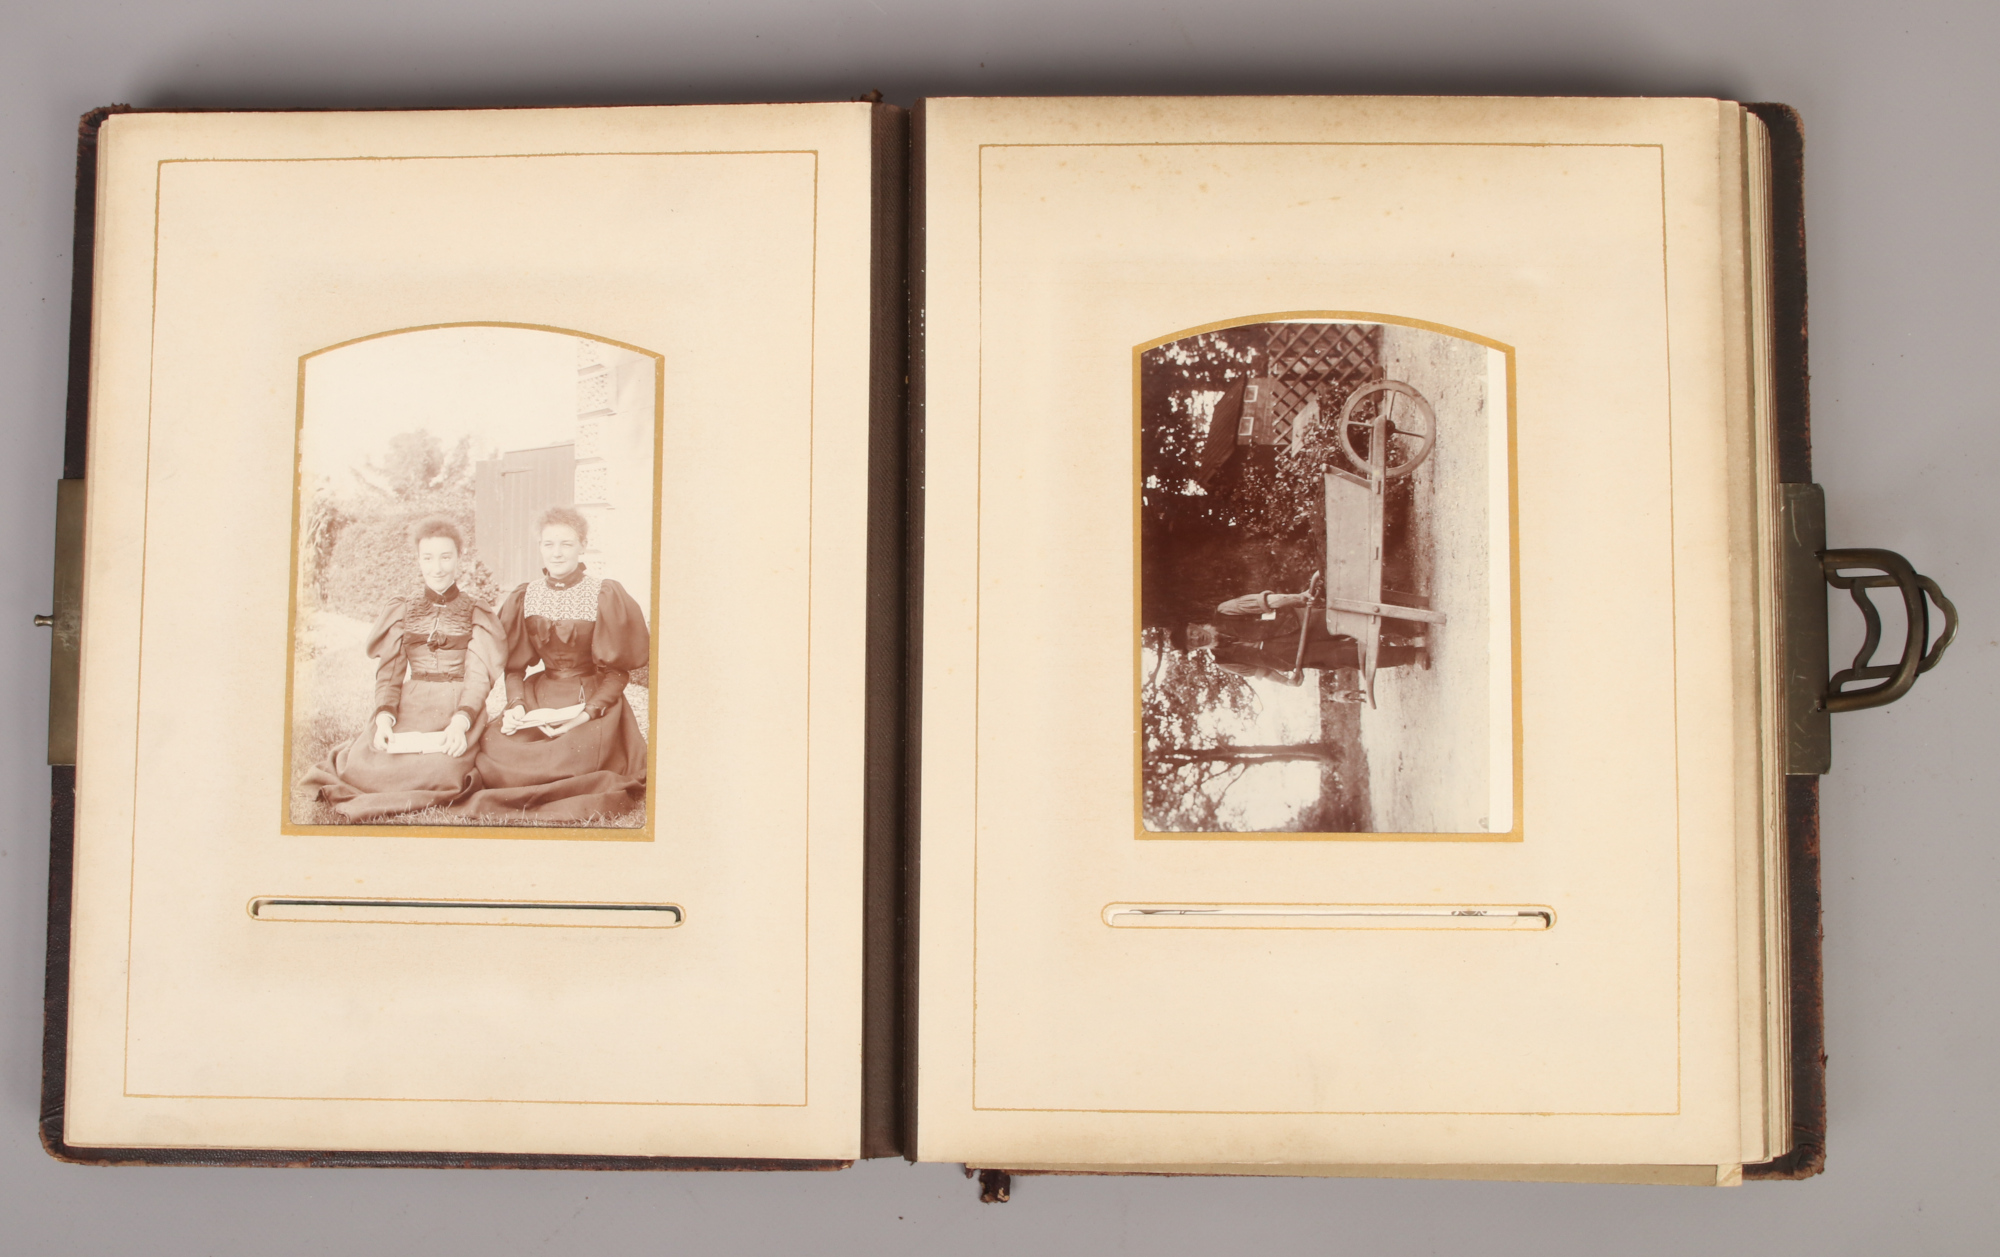 A late 19th / early 20th century photograph album and contents of monochrome portrait photographs. - Image 2 of 2